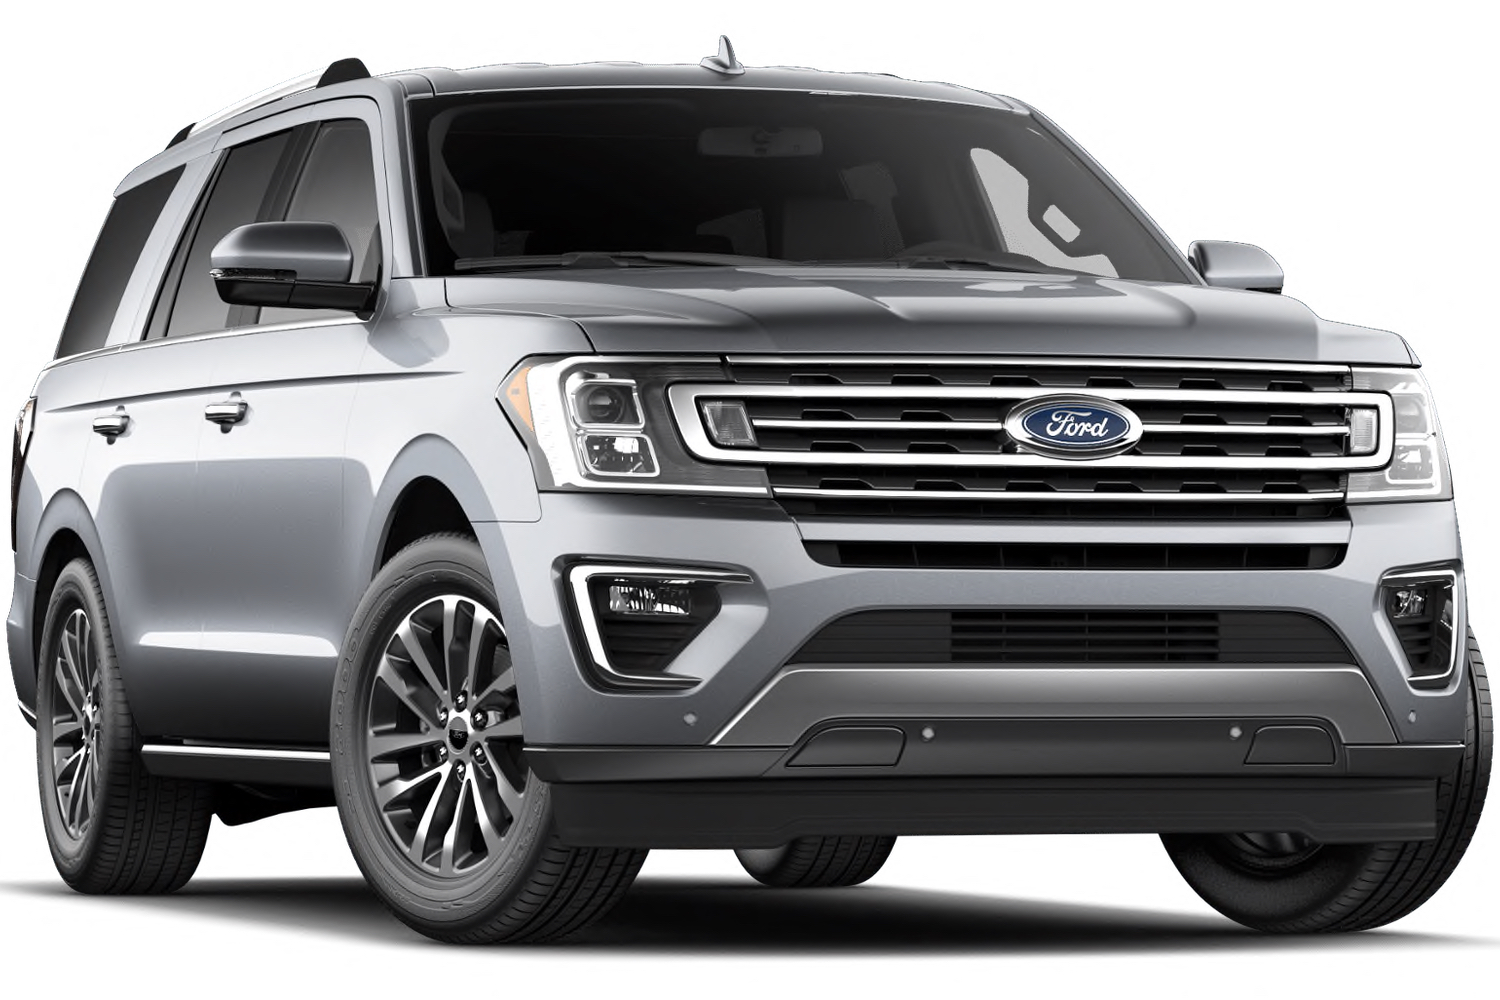 2020 Ford Expedition Gets New Iconic Silver Color: First Look